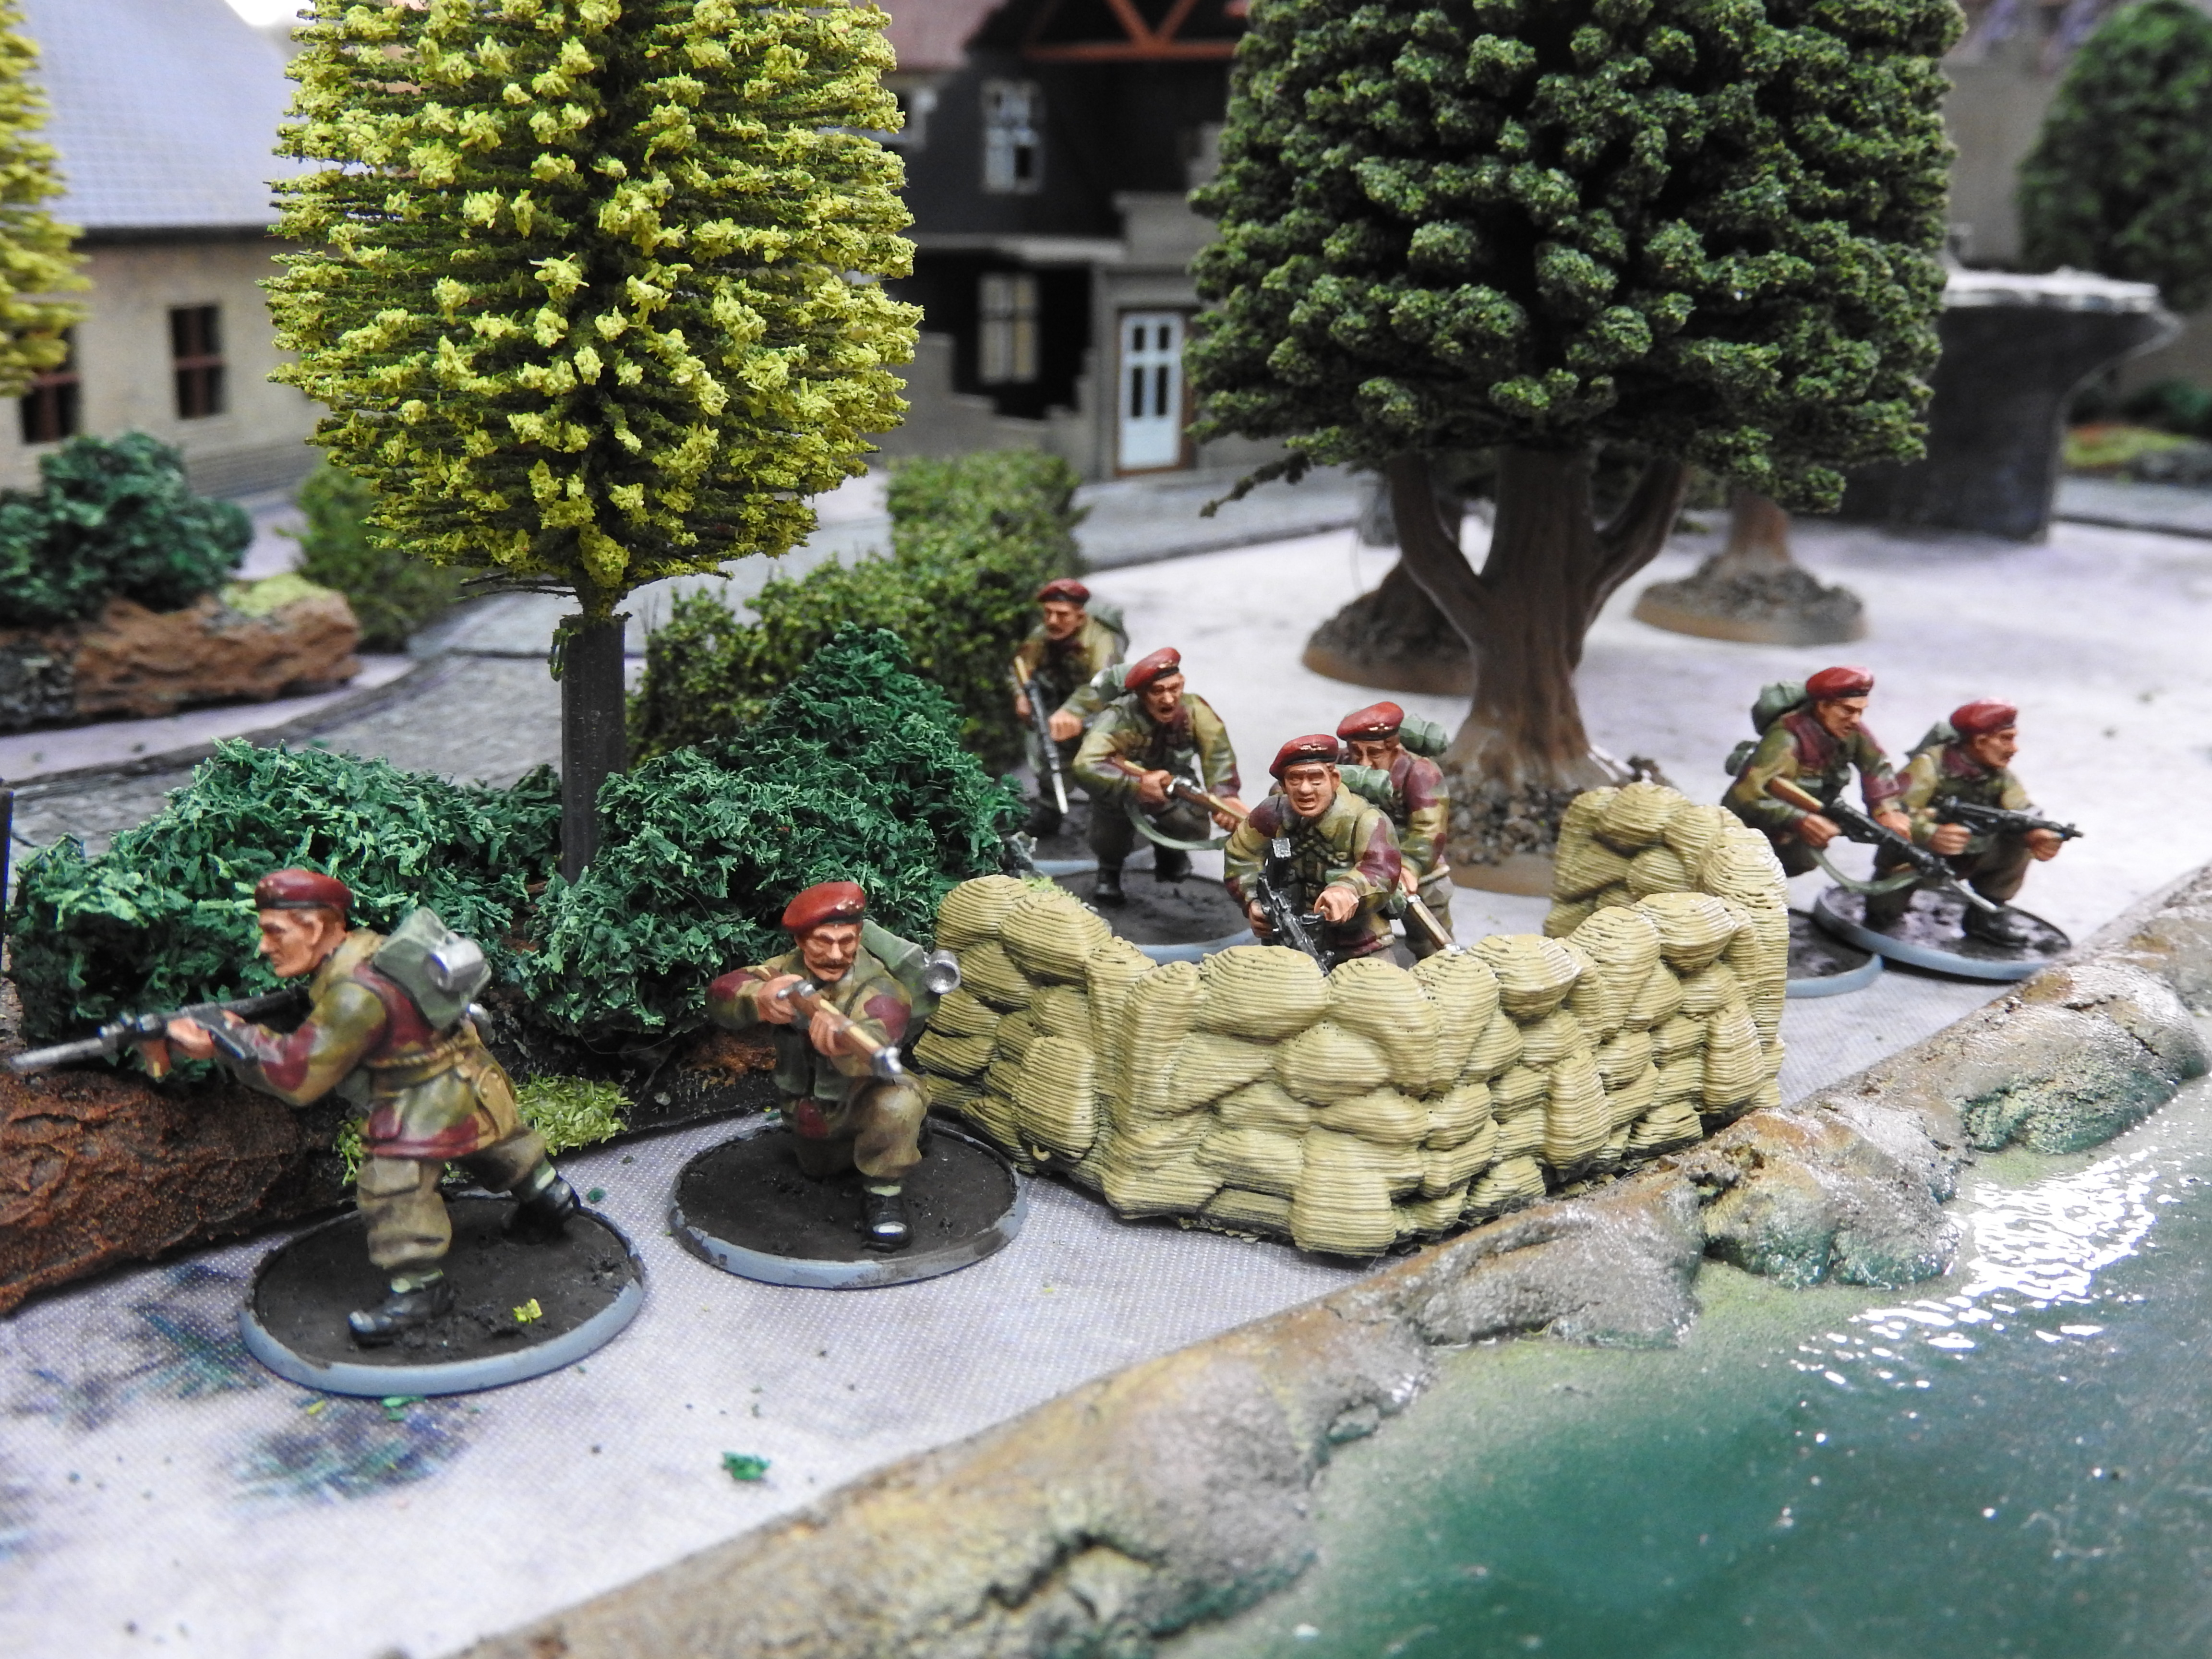 Red Devils versus 352nd Infantry Division in a fierce infantry engagement